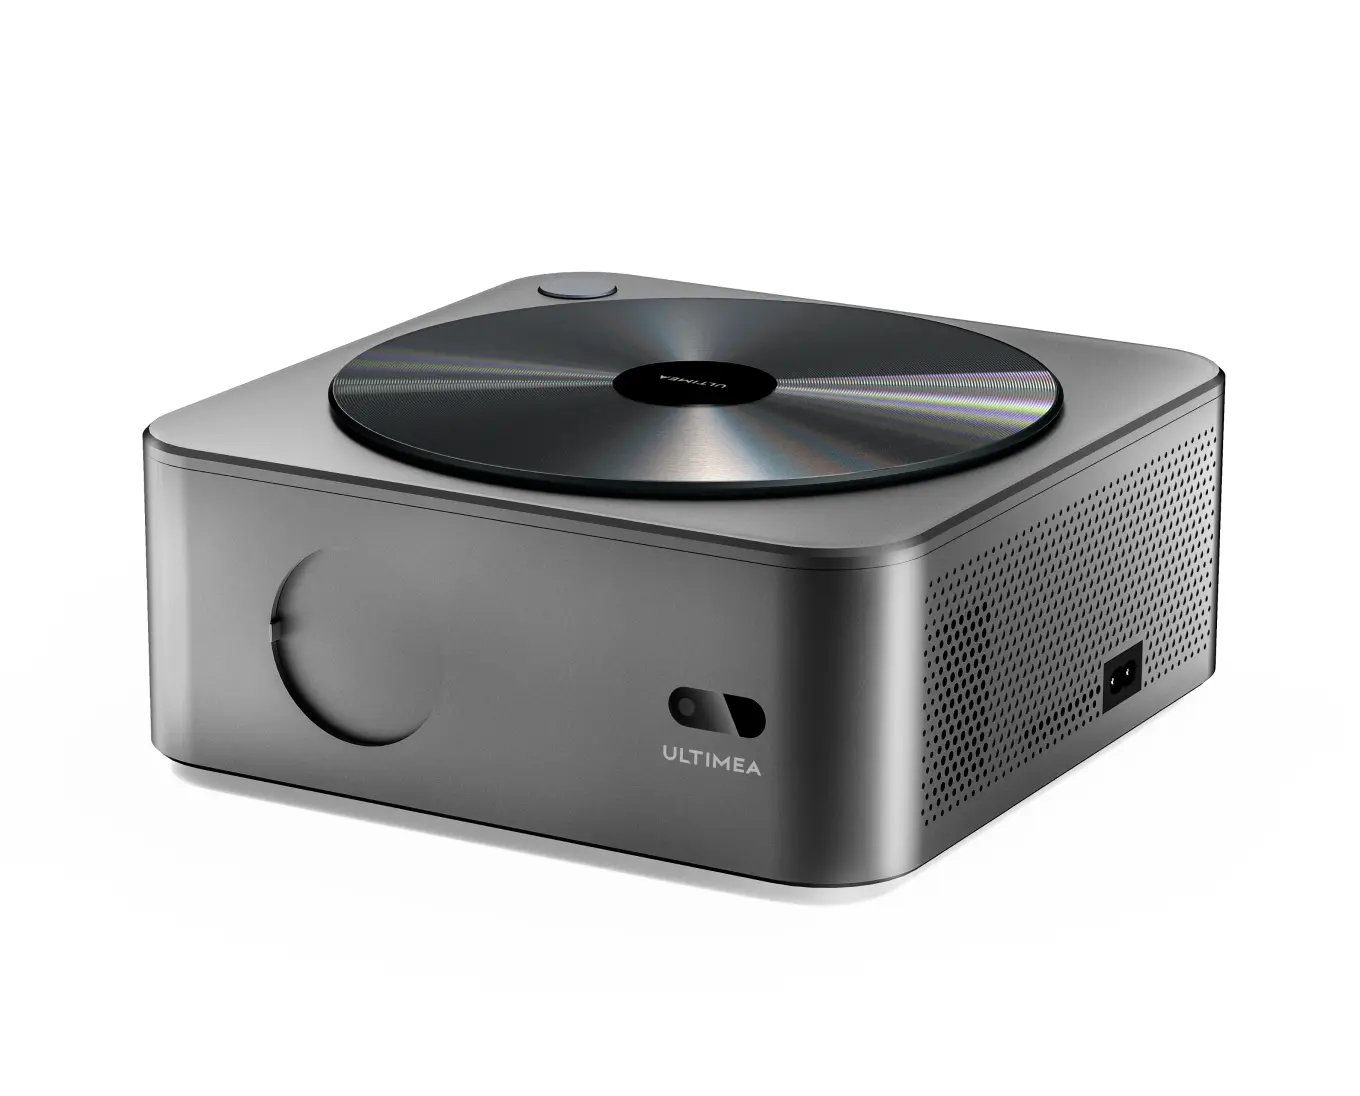 Review of the Apollo P40 Smart Home Theater Projector - TurboFuture